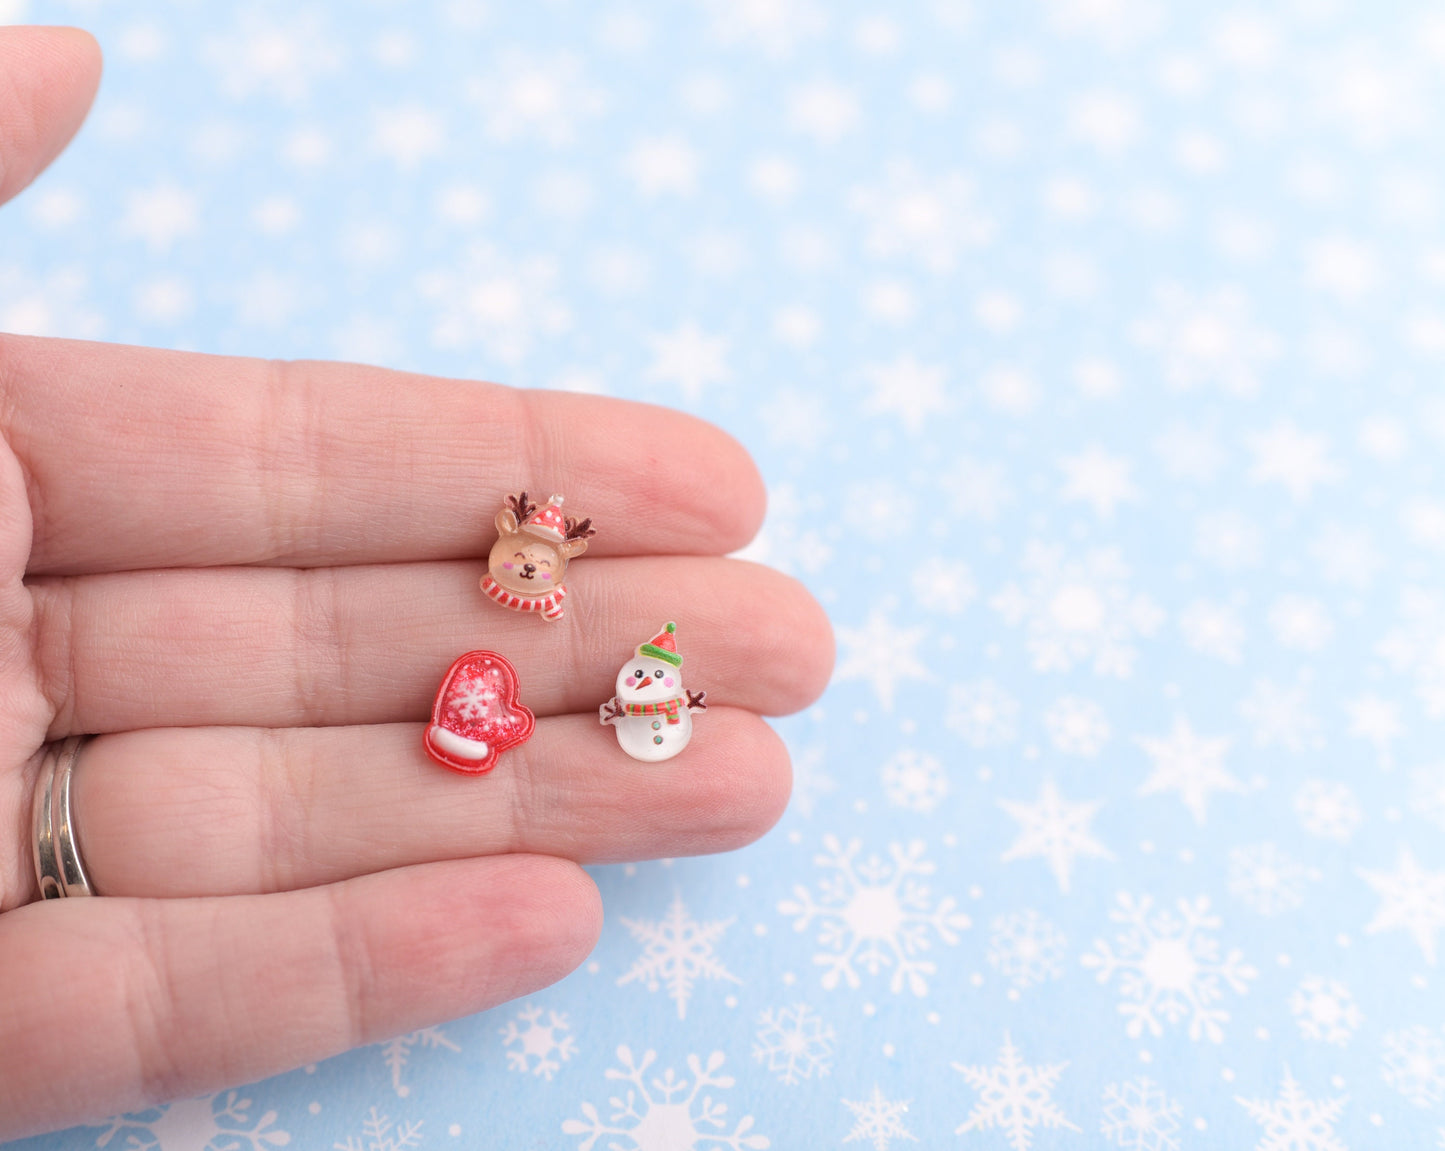 Reindeer, Mitten, and Snowman Earring Trio with Titanium Posts